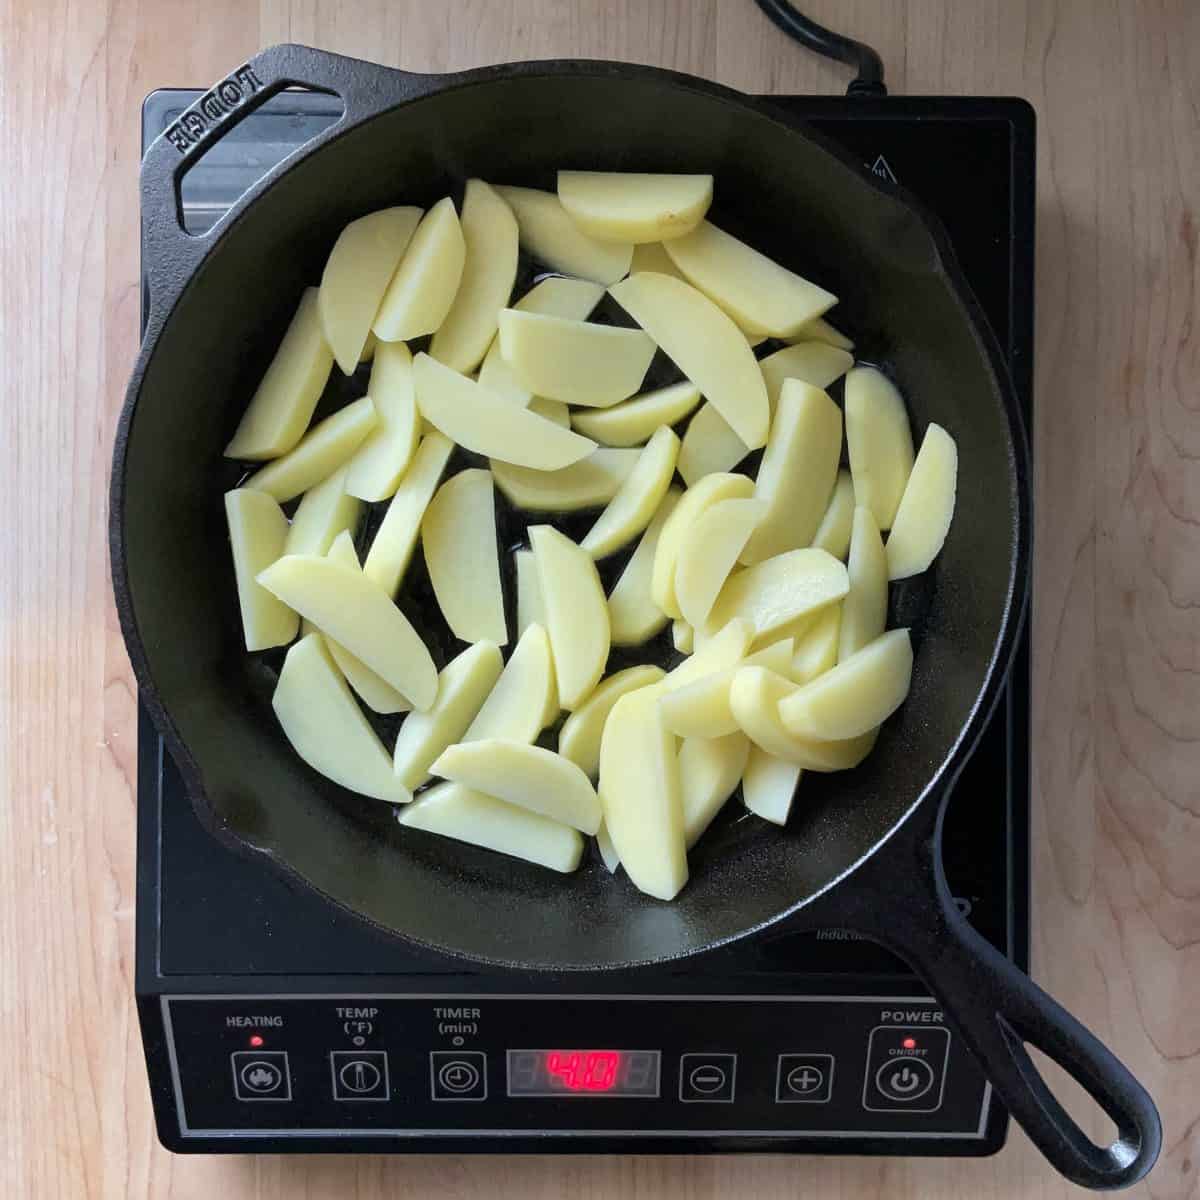 Sliced potatoes in a cast iron pan.